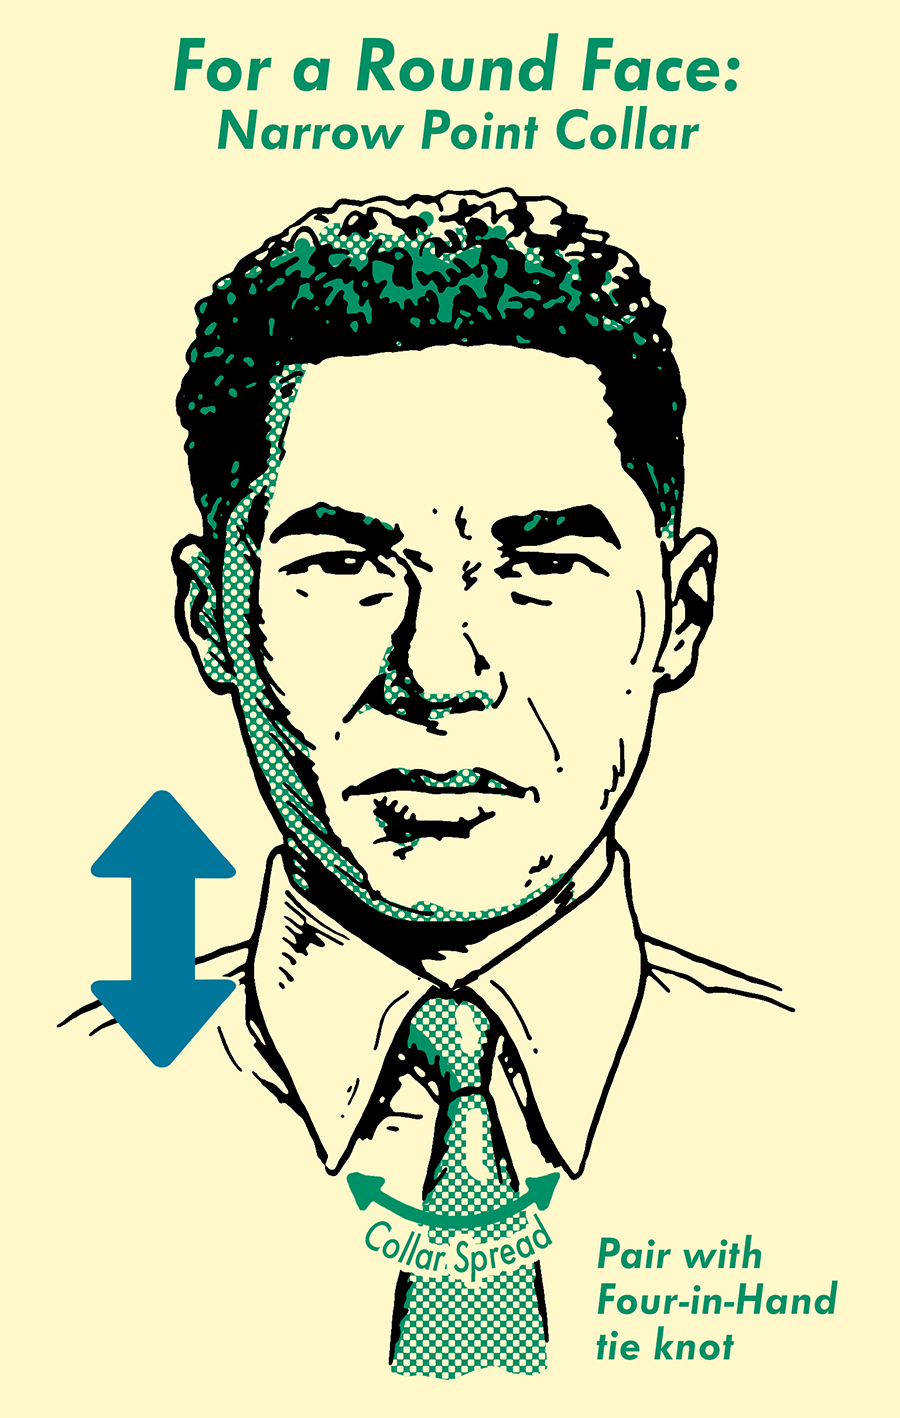 A round face man with narrow point collar illustration.